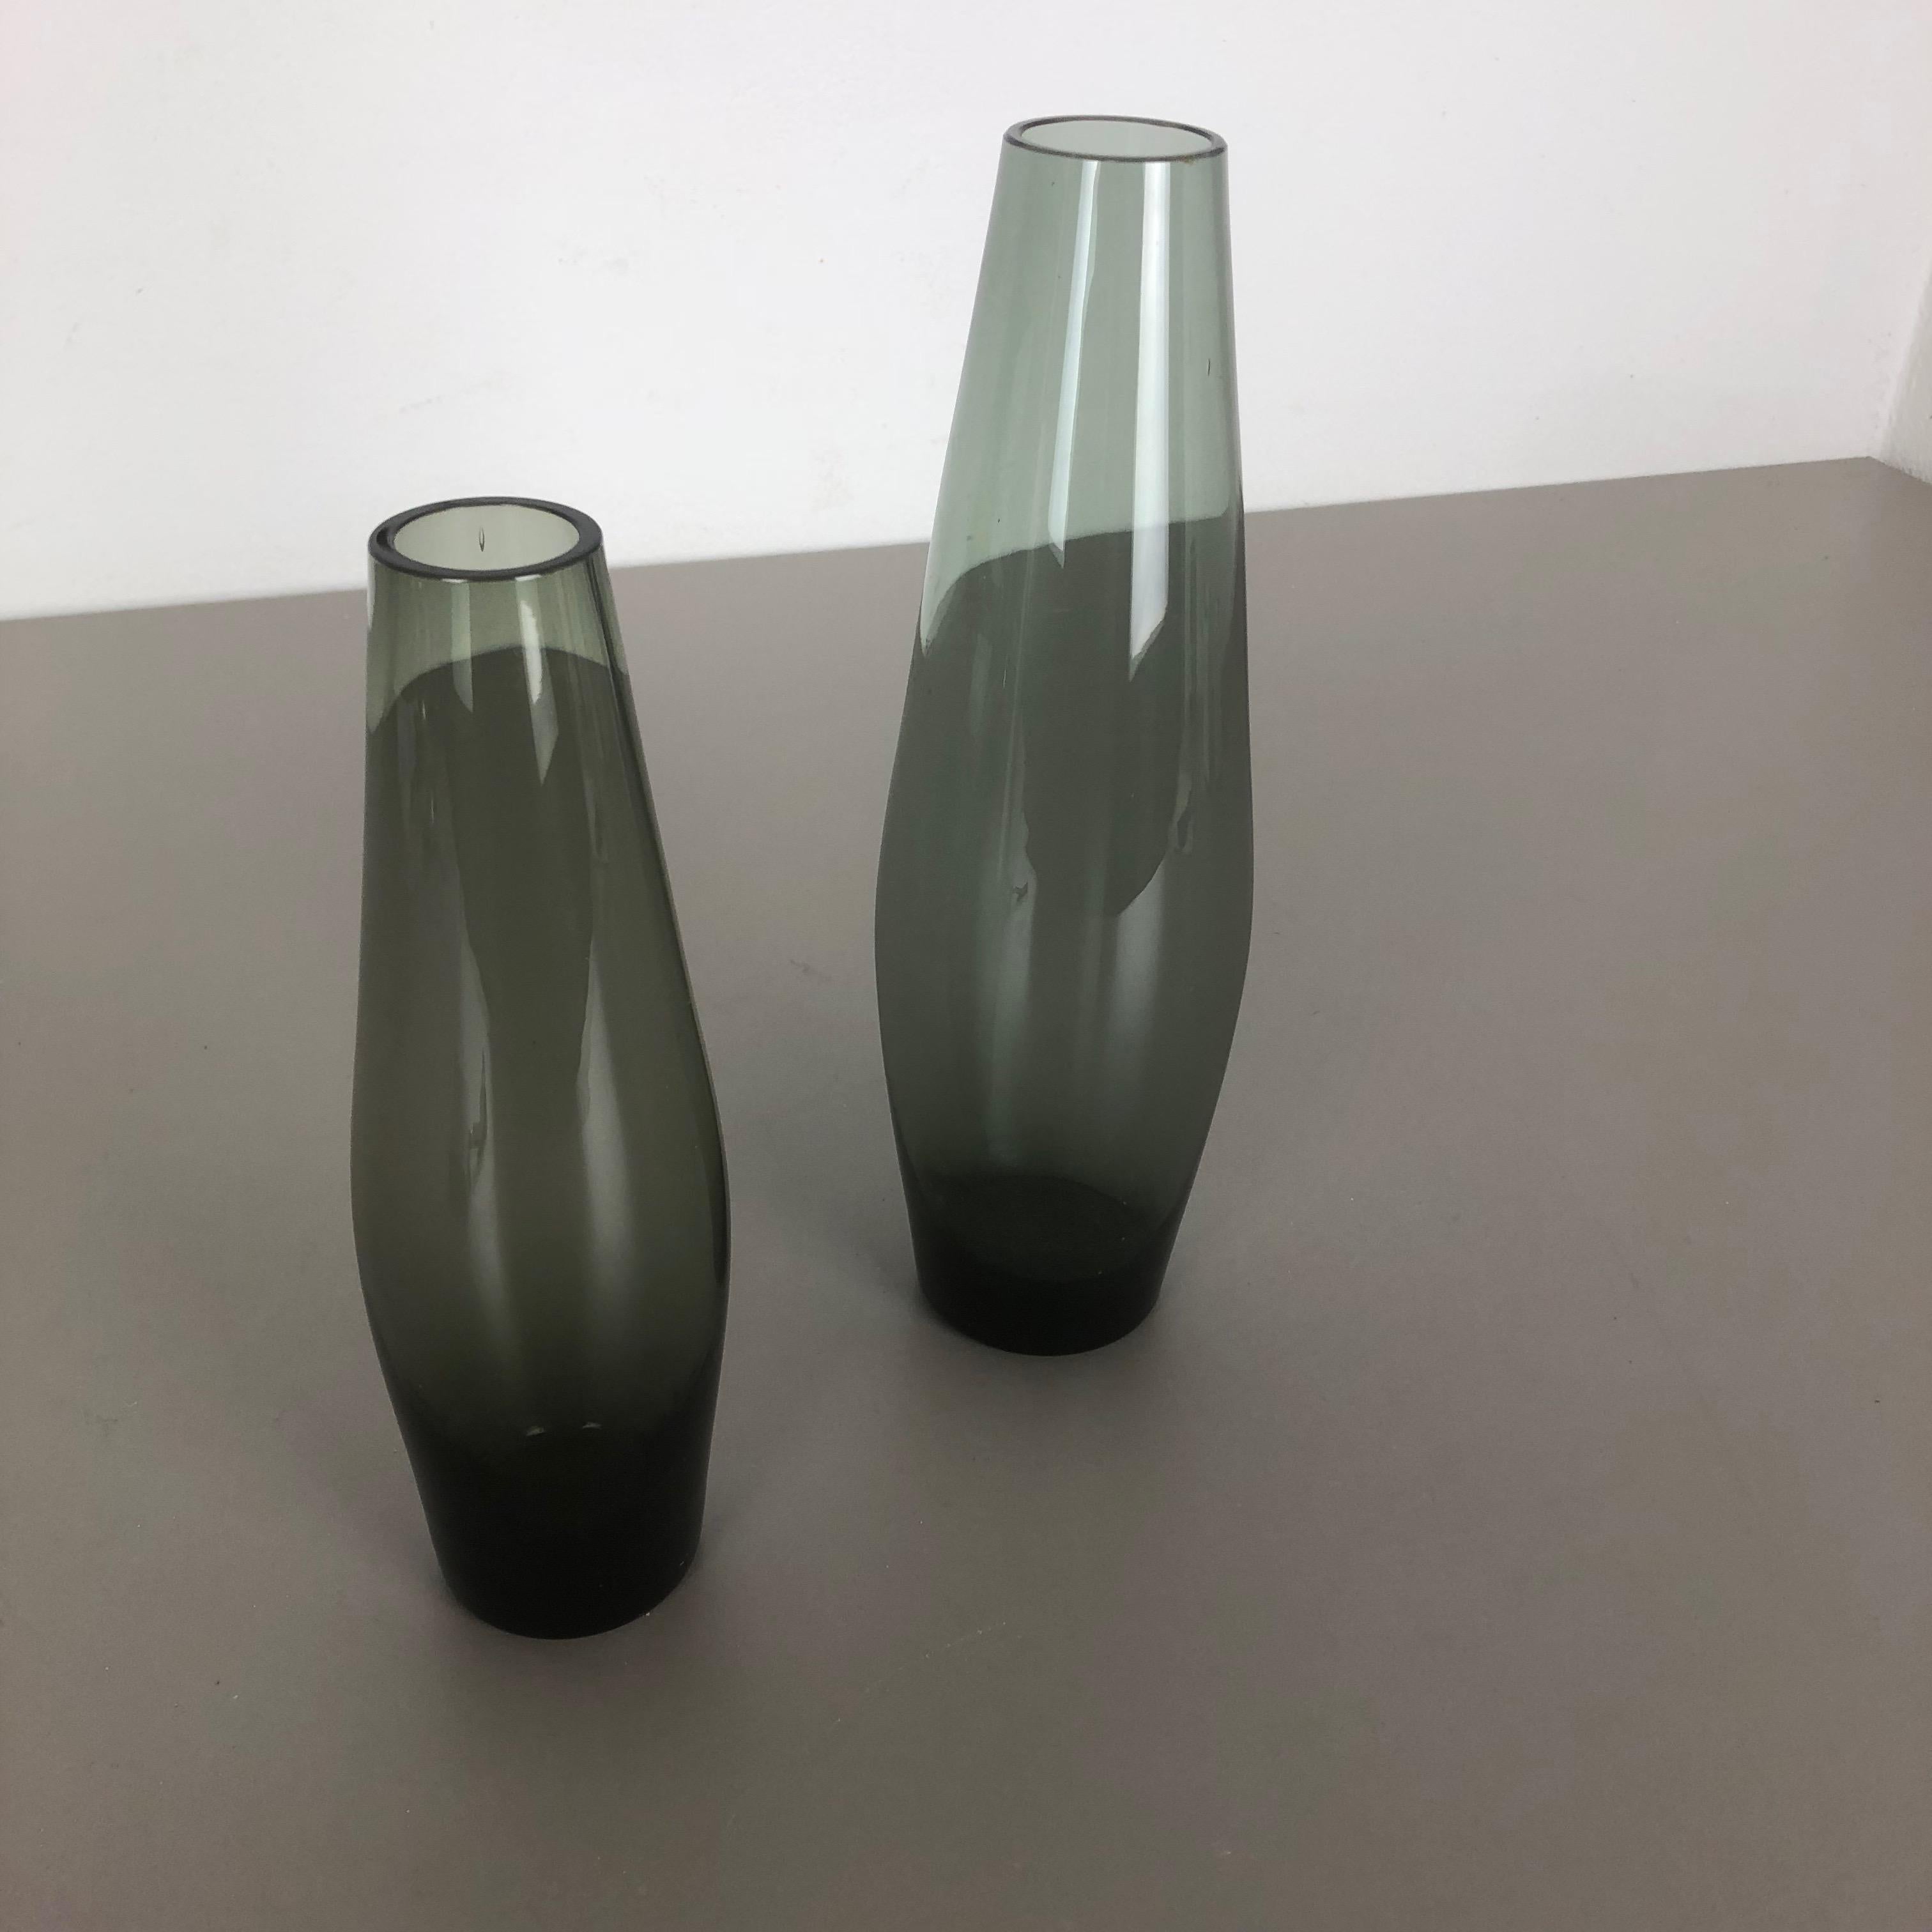 Vintage 1960s Set of 2 Turmaline Vases by Wilhelm Wagenfeld for WMF, Germany In Good Condition For Sale In Kirchlengern, DE